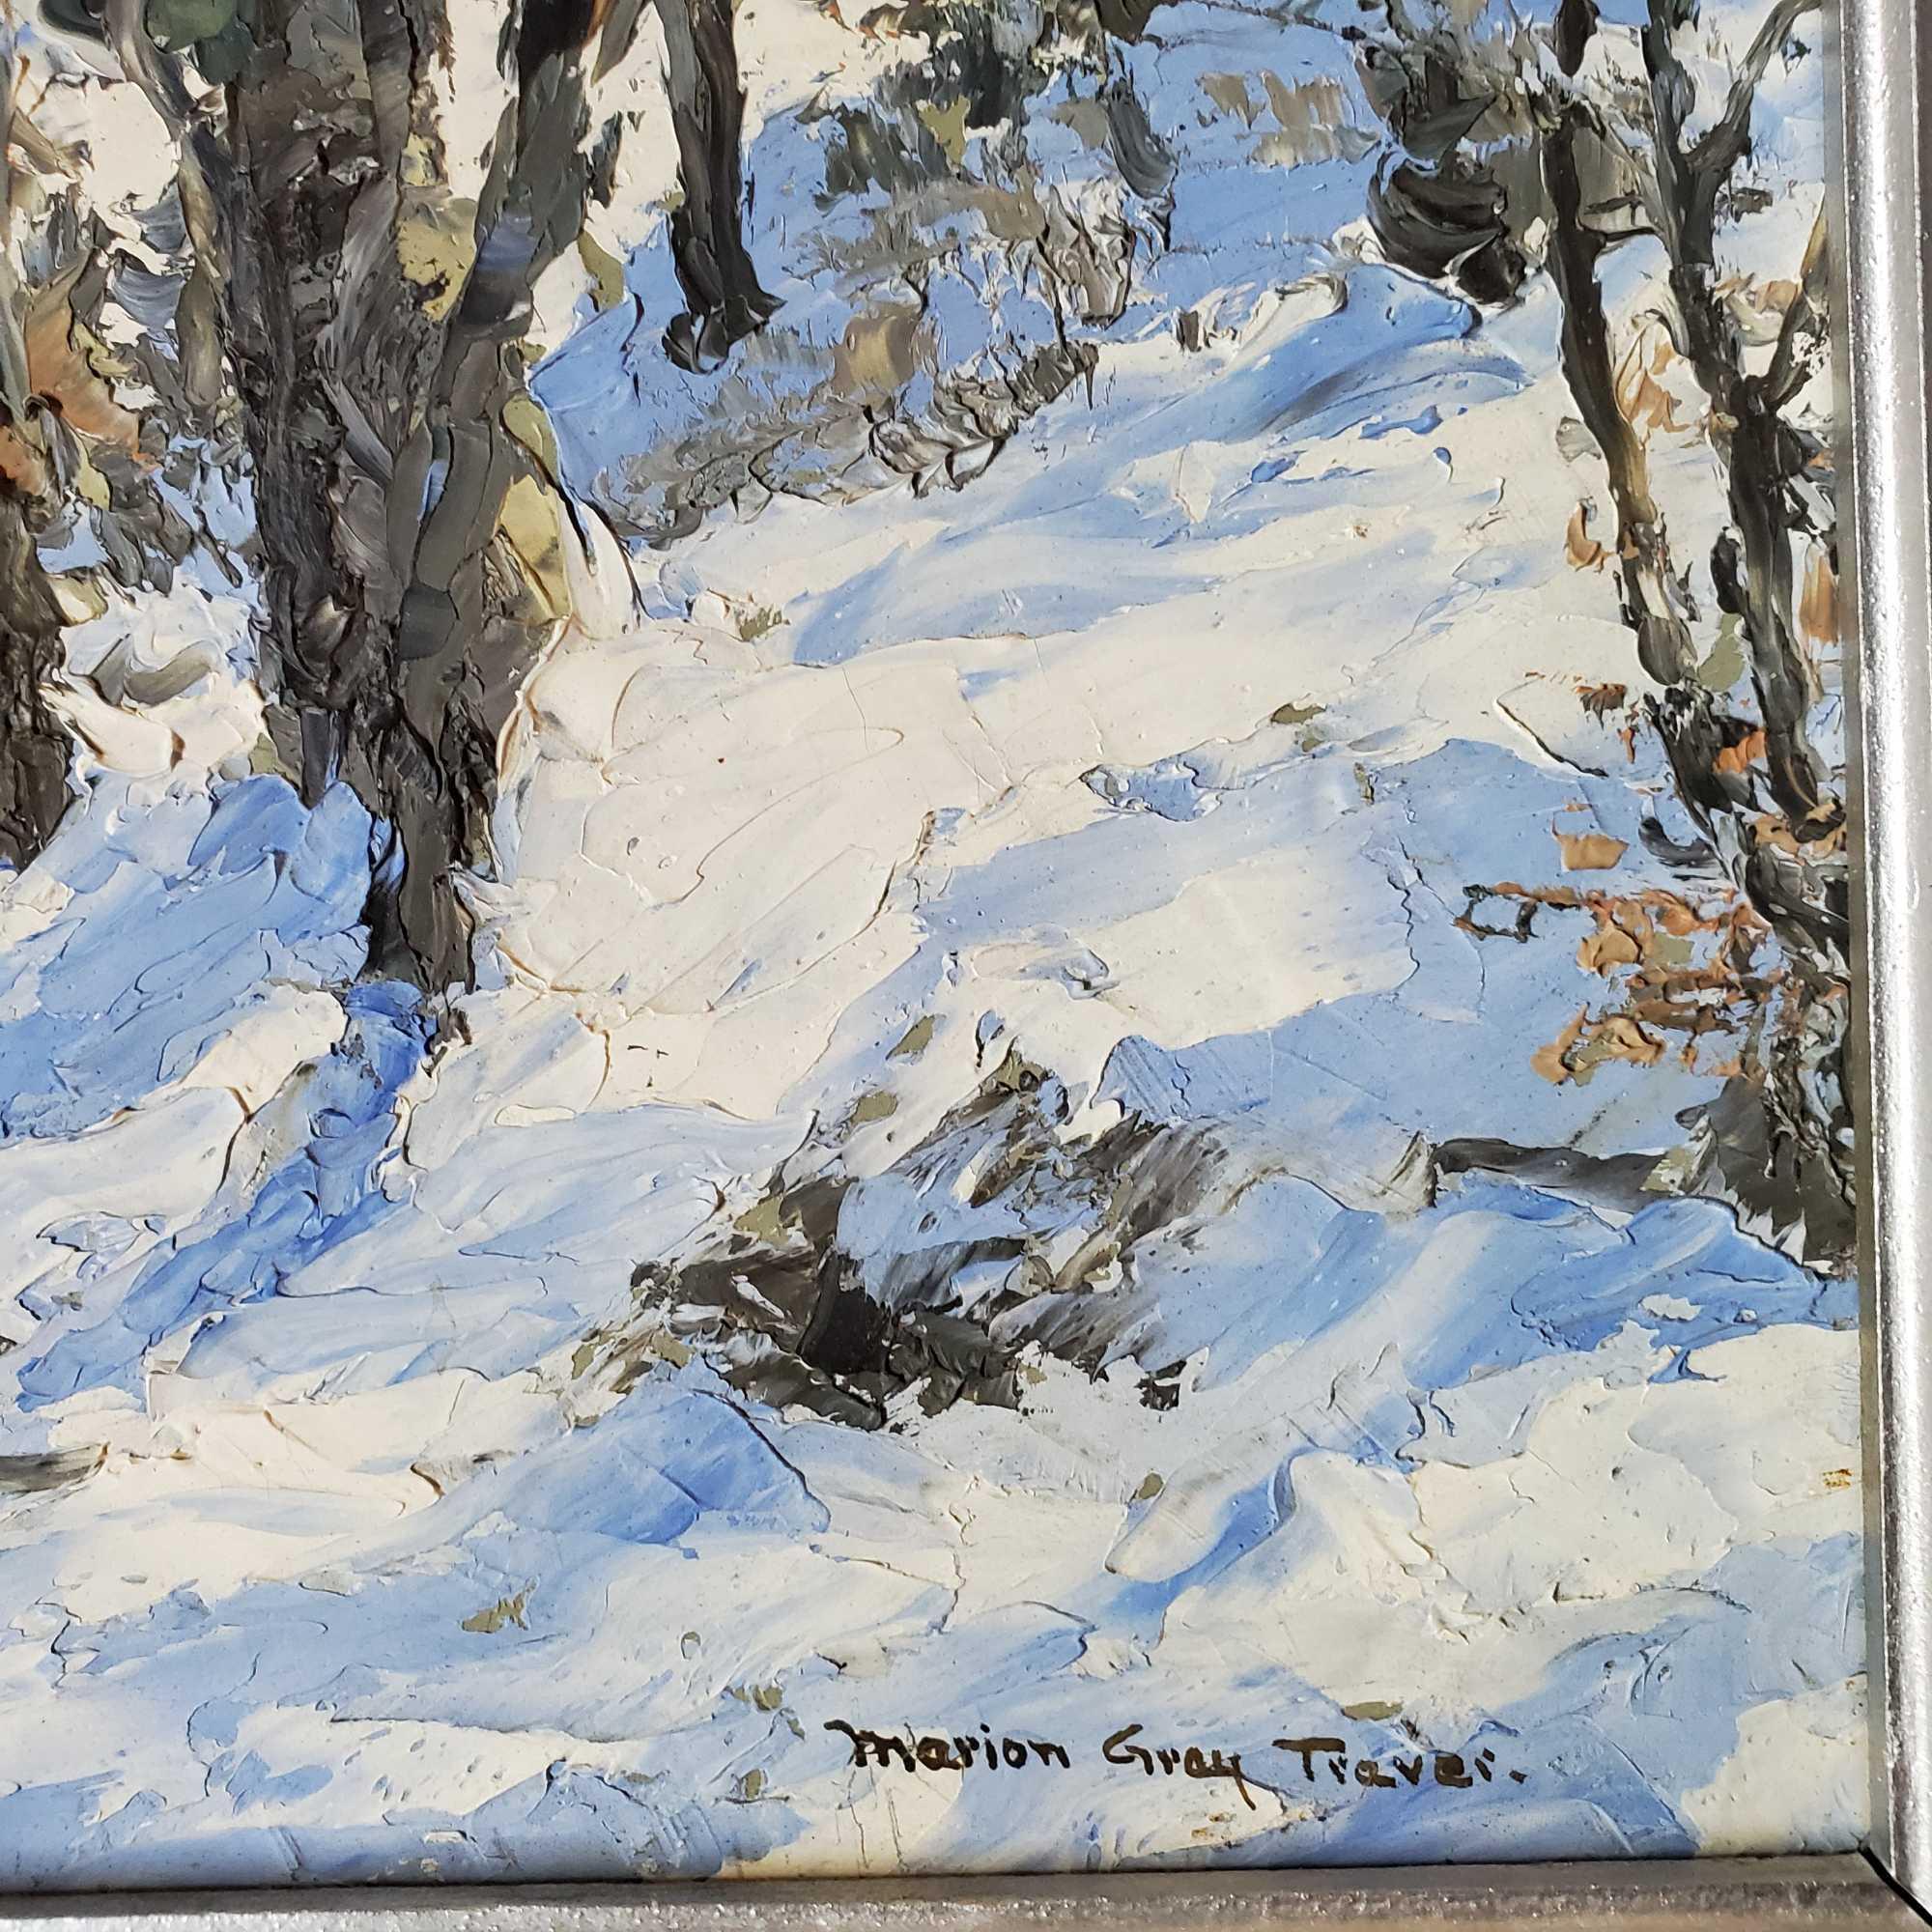 Marion Gray Traver (1892 - 1964) was active/lived in New York. "Through Snowy Woods"